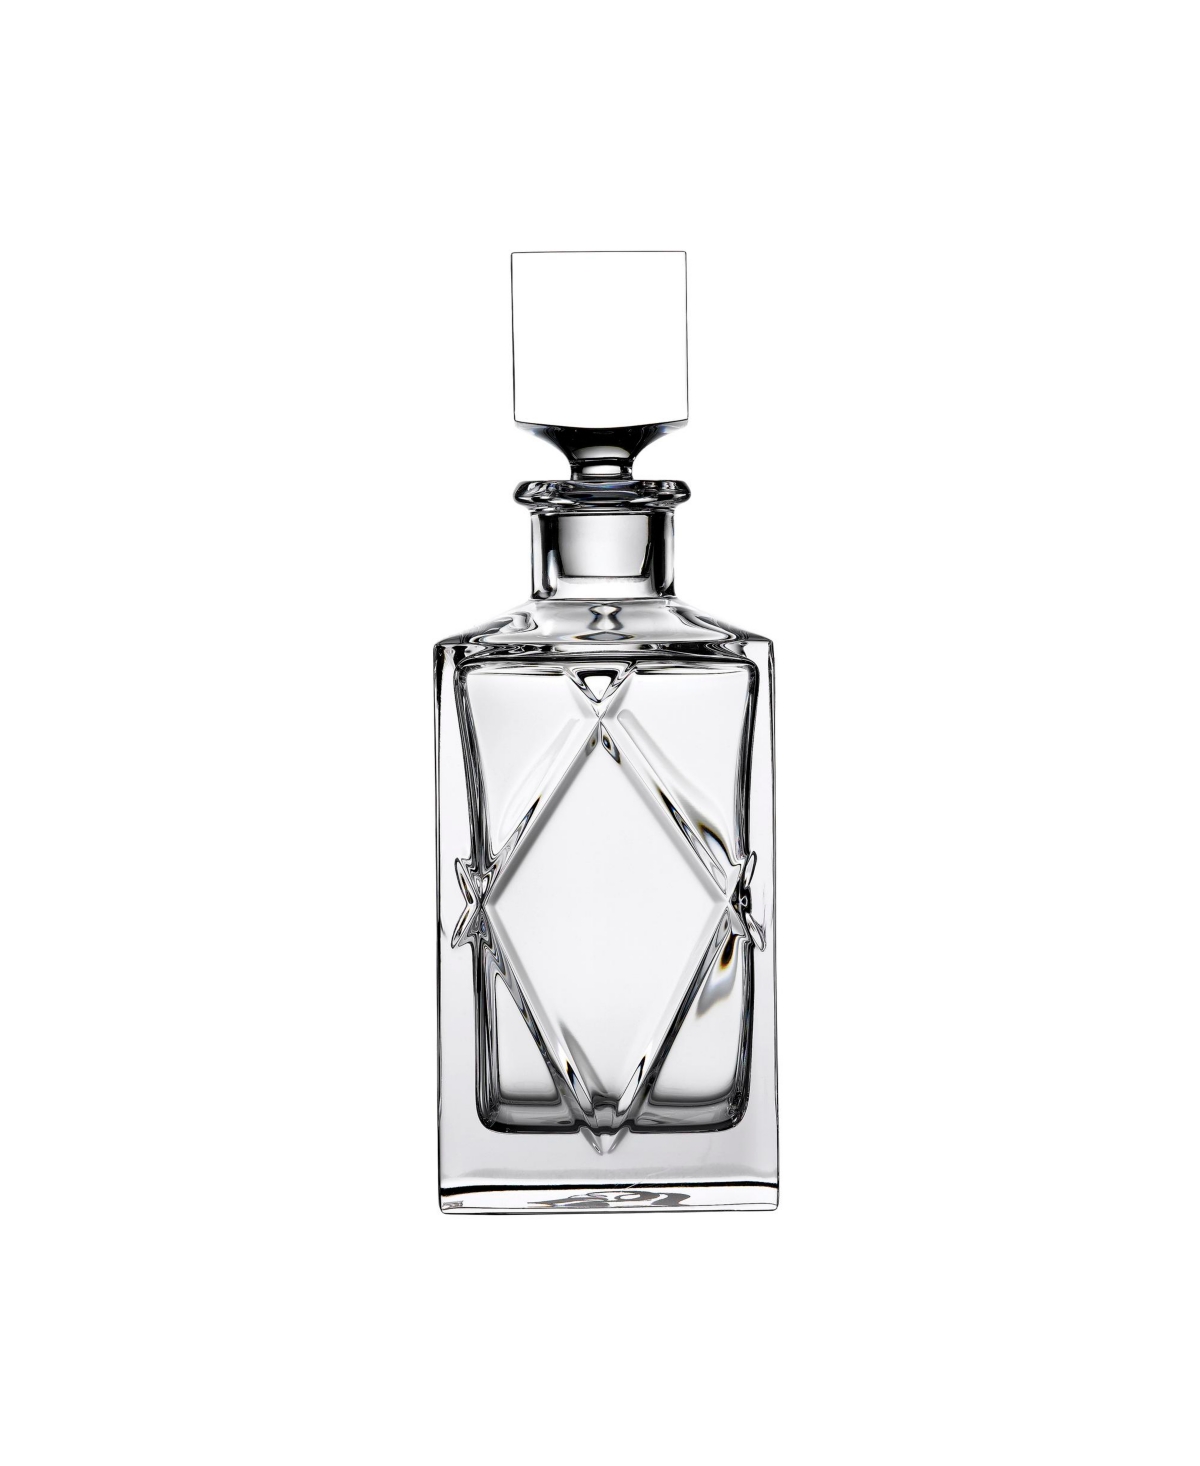 Waterford Connoisseur Olann Square Decanter 25 oz In Clear